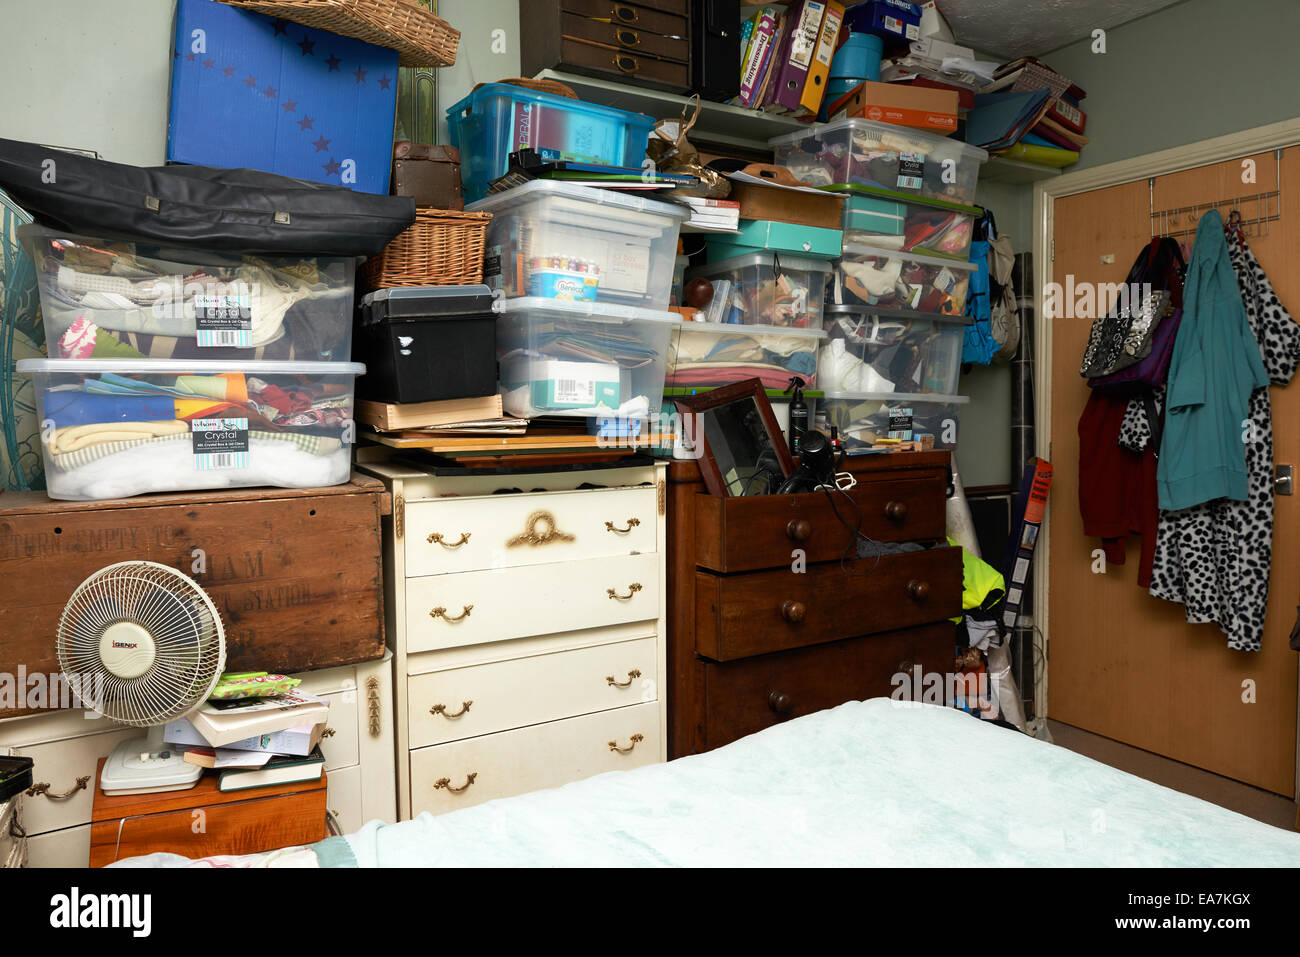 Bedroom filled with clutter Stock Photo